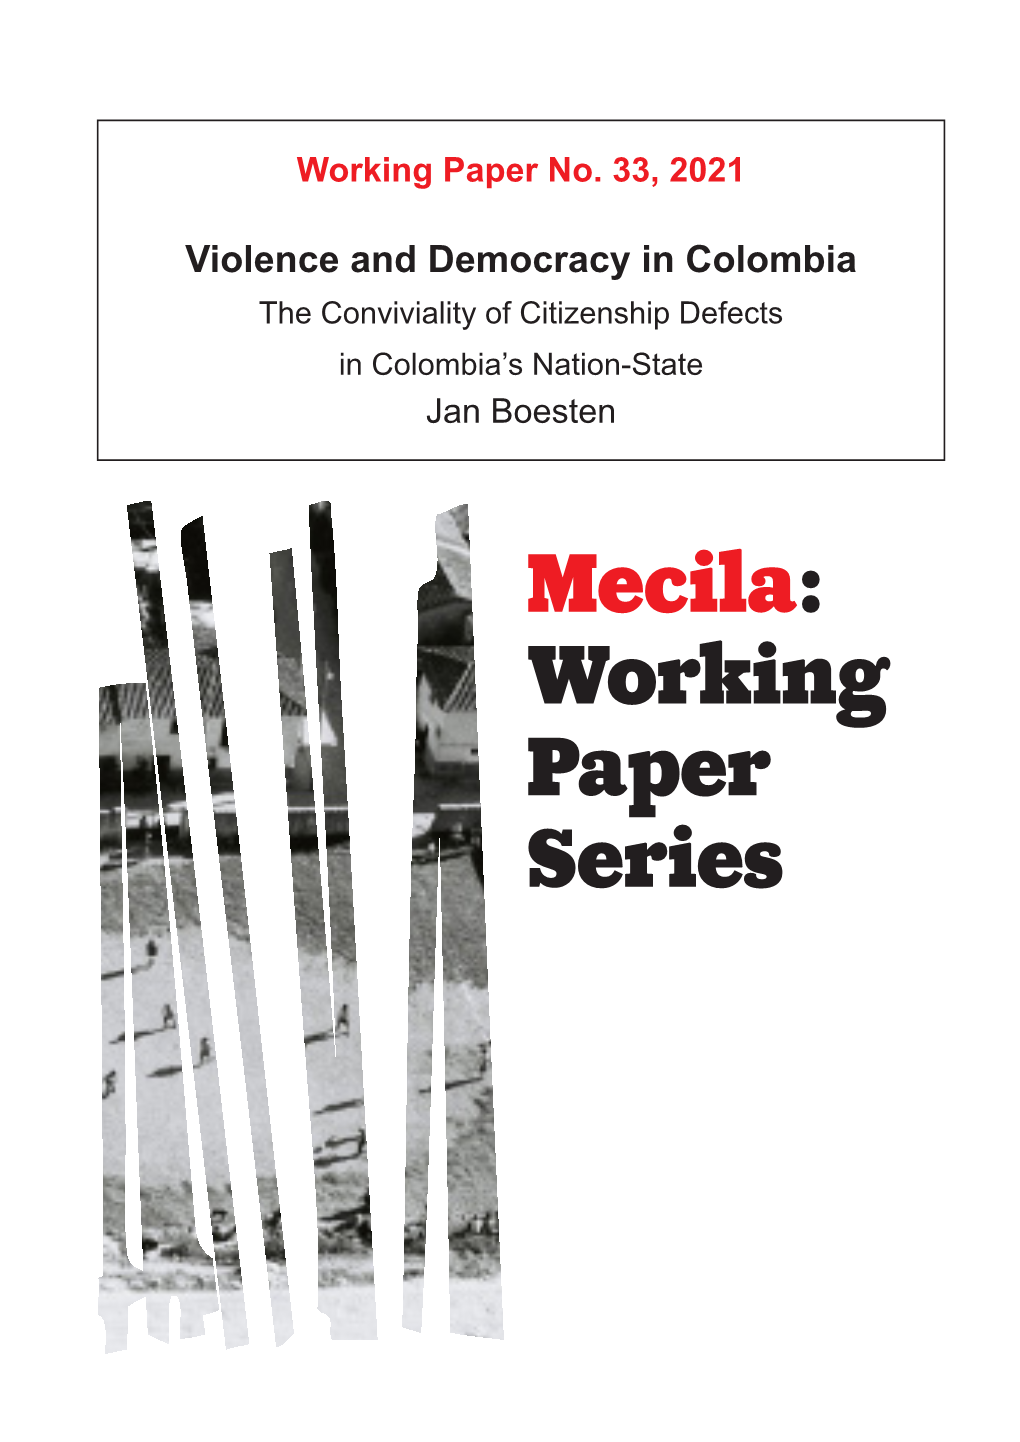 Violence and Democracy in Colombia the Conviviality of Citizenship Defects in Colombia’S Nation-State Jan Boesten the Mecila Working Paper Series Is Produced By